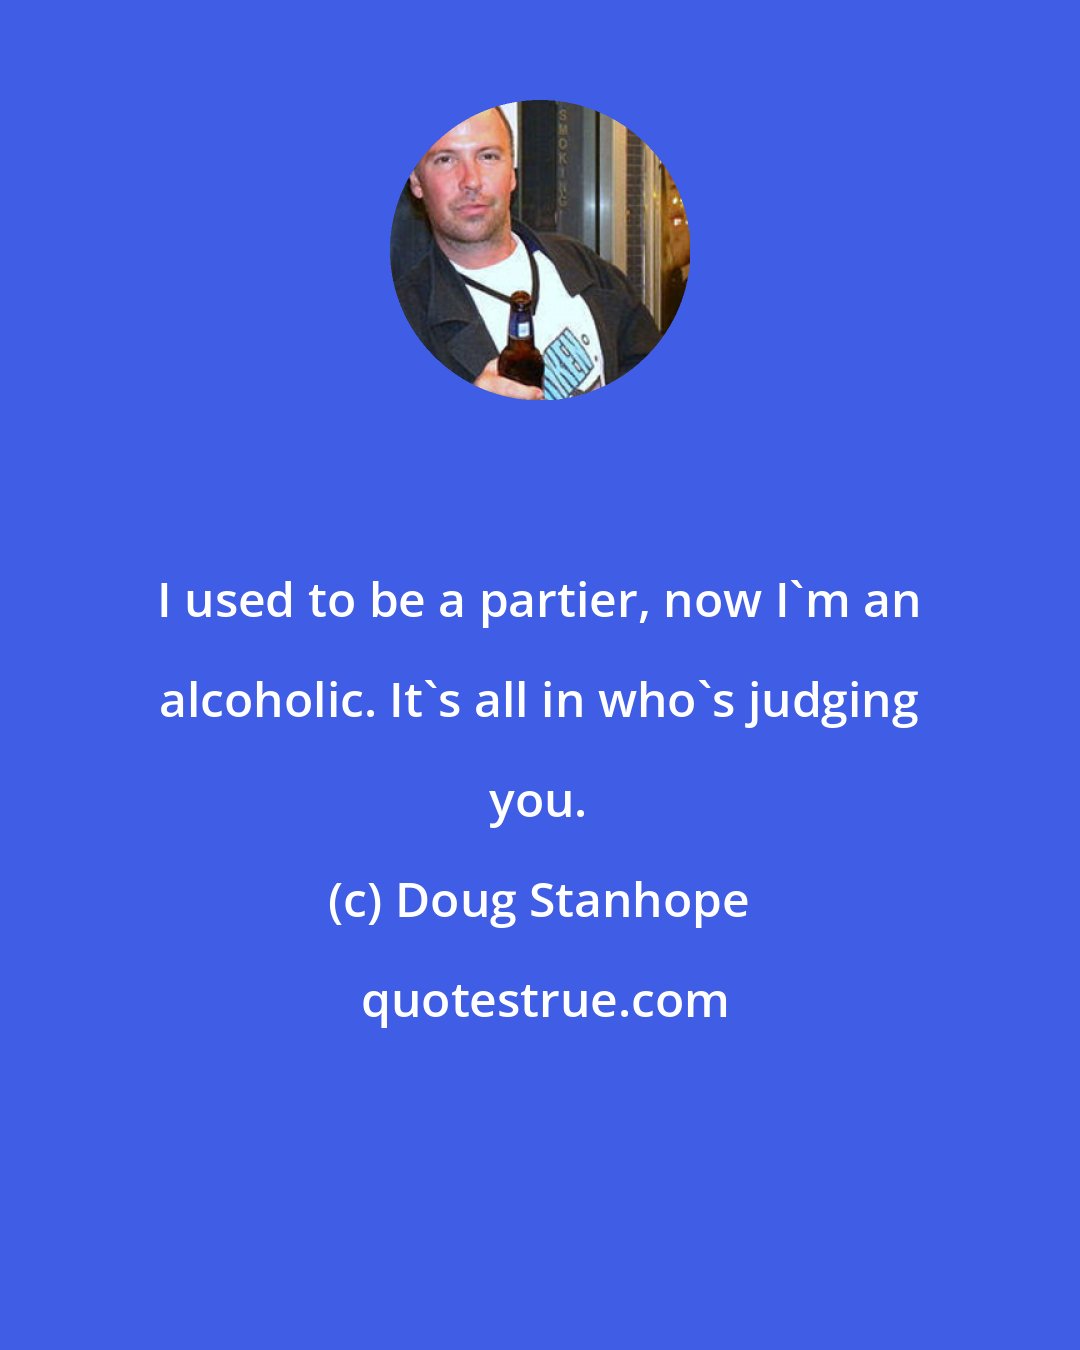 Doug Stanhope: I used to be a partier, now I'm an alcoholic. It's all in who's judging you.